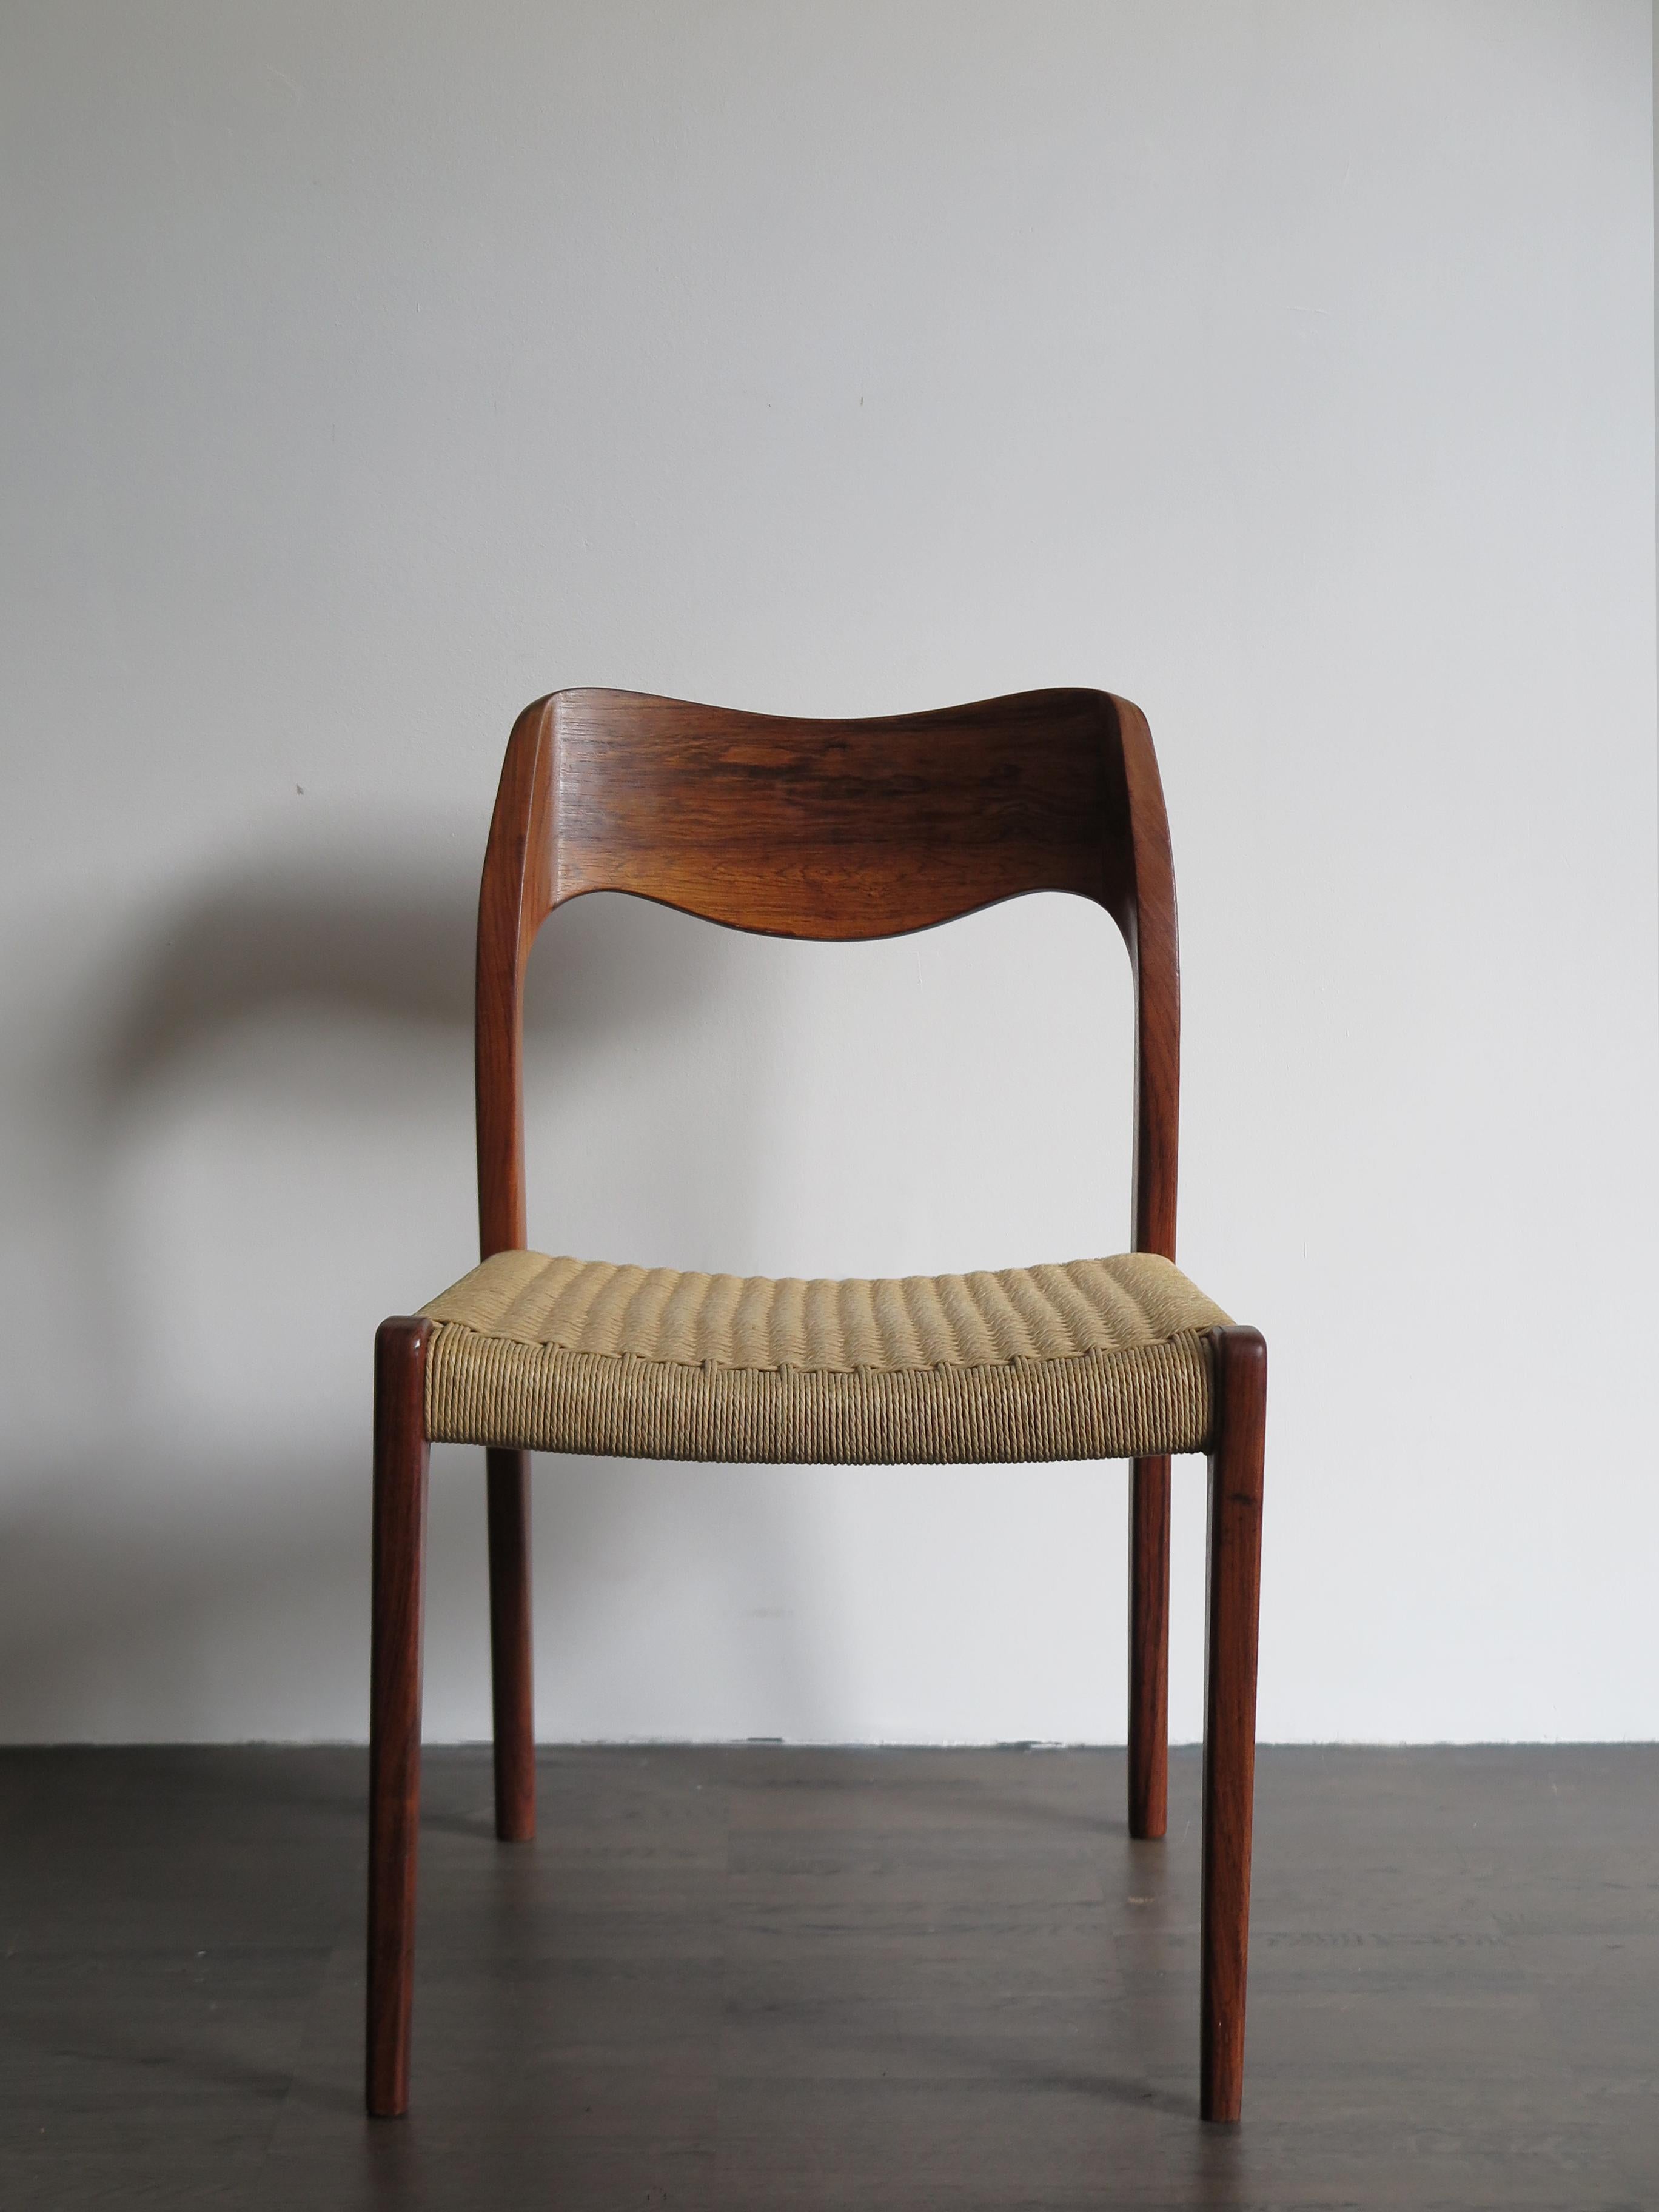 Mid-20th Century Niels O. Møller Scandinavian Midcentury Dining Chairs 71 in Wood and Rope, 1960s